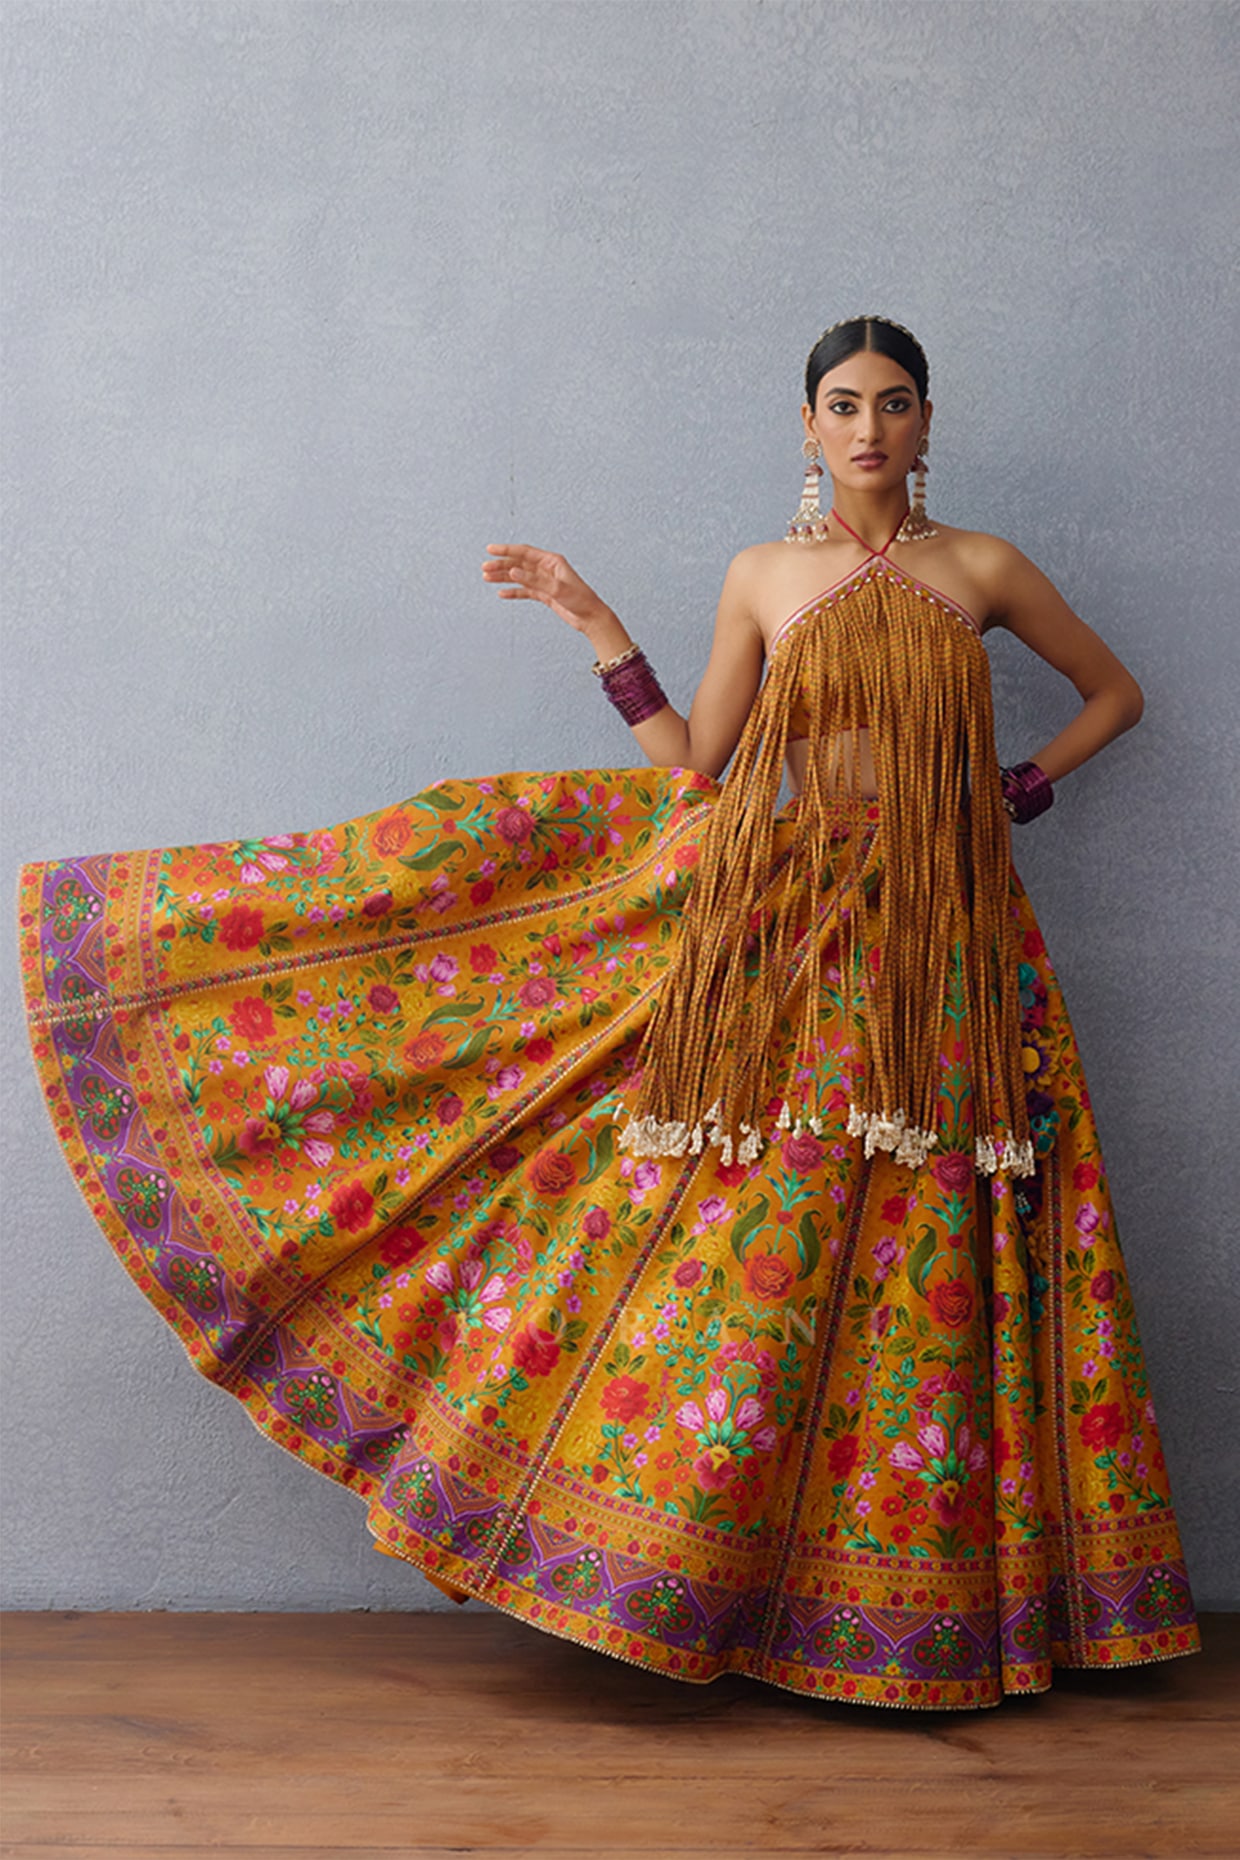 What to Wear to an Indian Wedding as a Guest